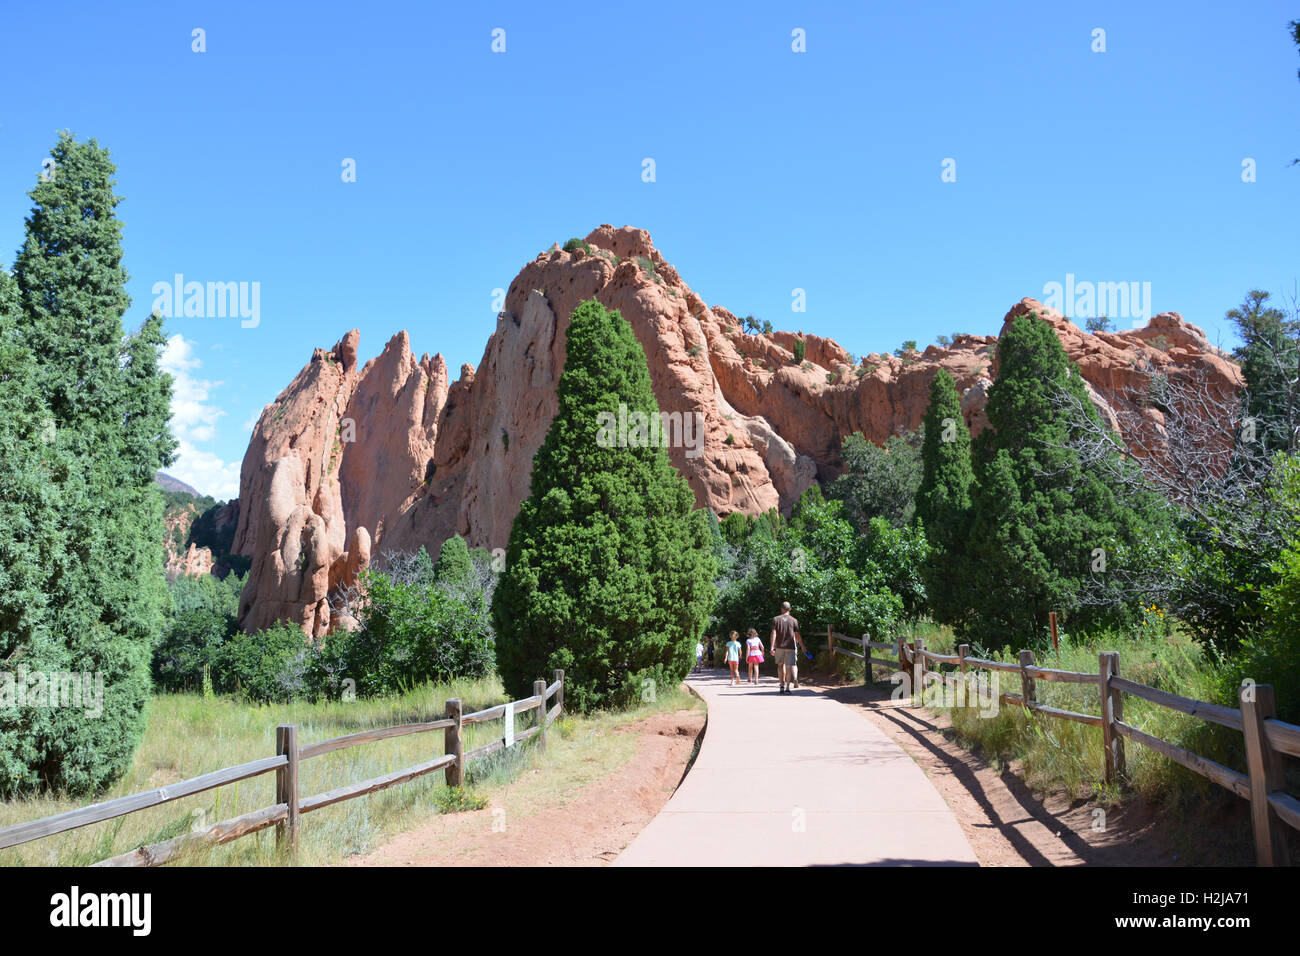 People hiking at Garden of the Gods Park amid sandstone formations and evergreen trees. Stock Photo